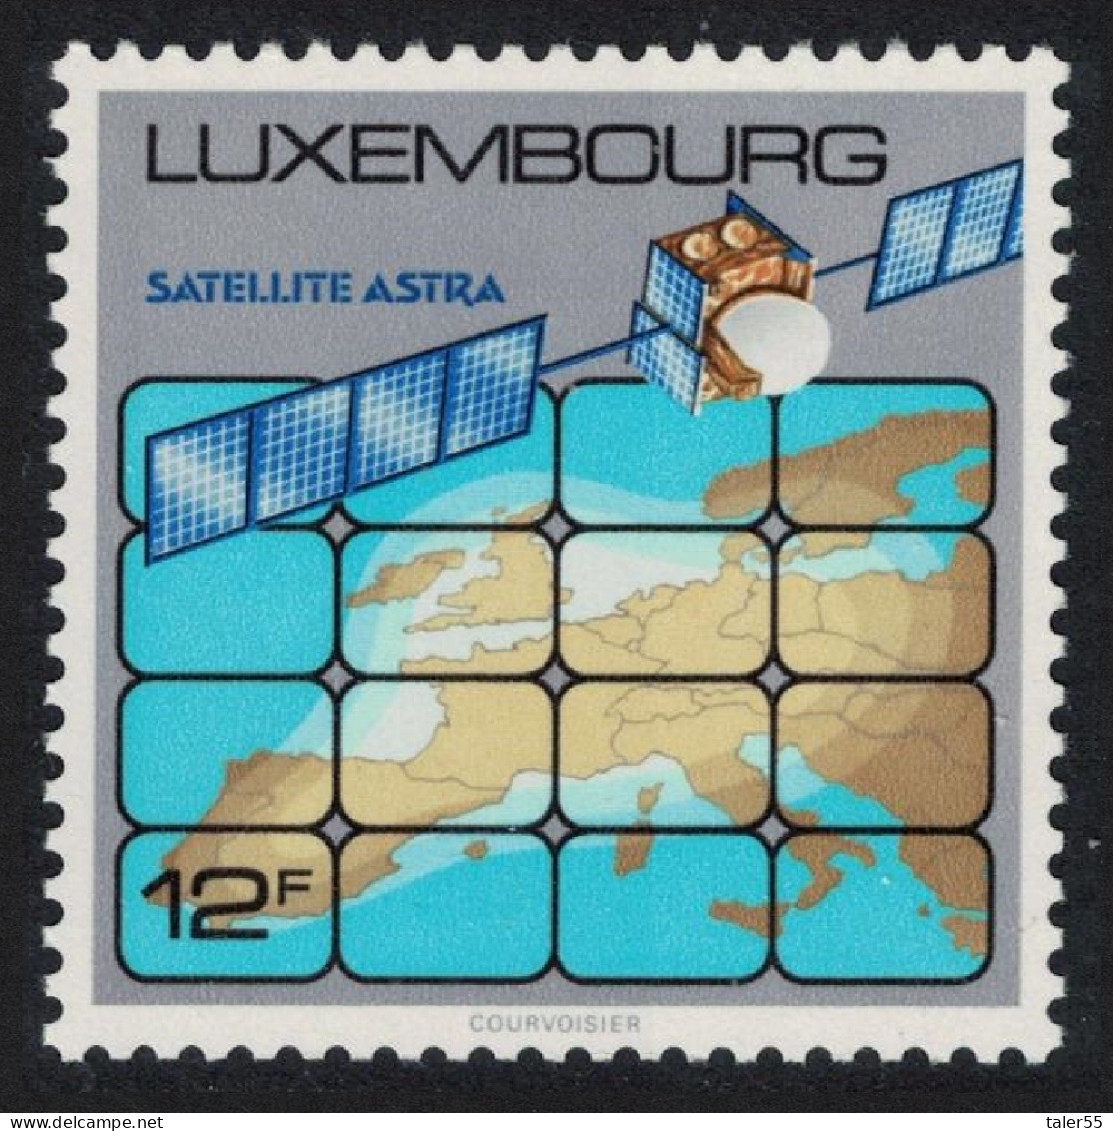 Luxembourg Launch Of 16-channel TV Satellite 1989 MNH SG#1245 MI#1218 - Unused Stamps